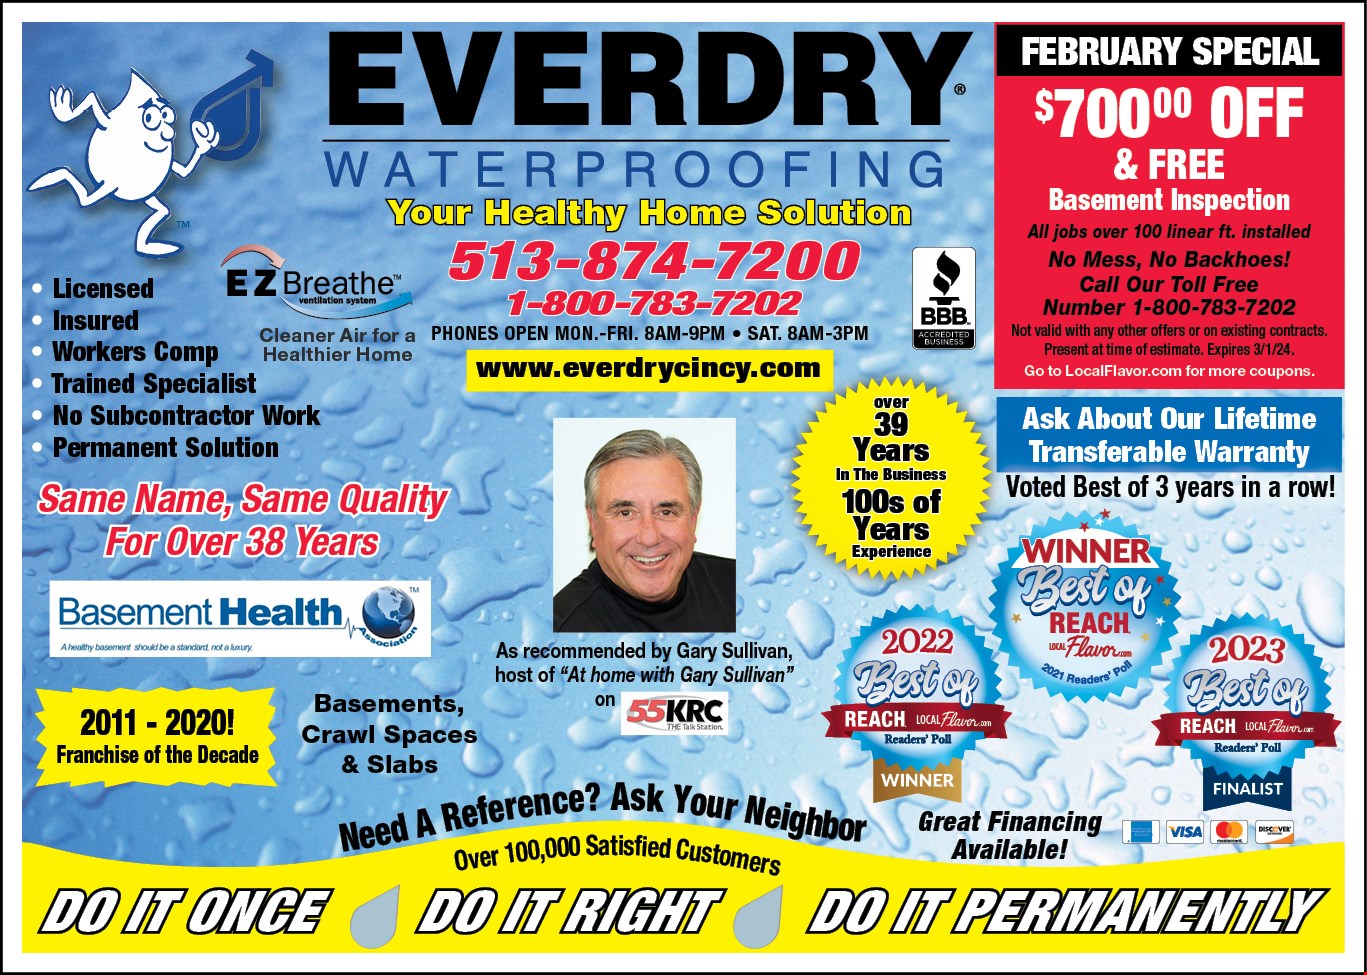 February special $700.00 off & free basement inspection. at Everdry  Waterproofing - Fairfield, OH